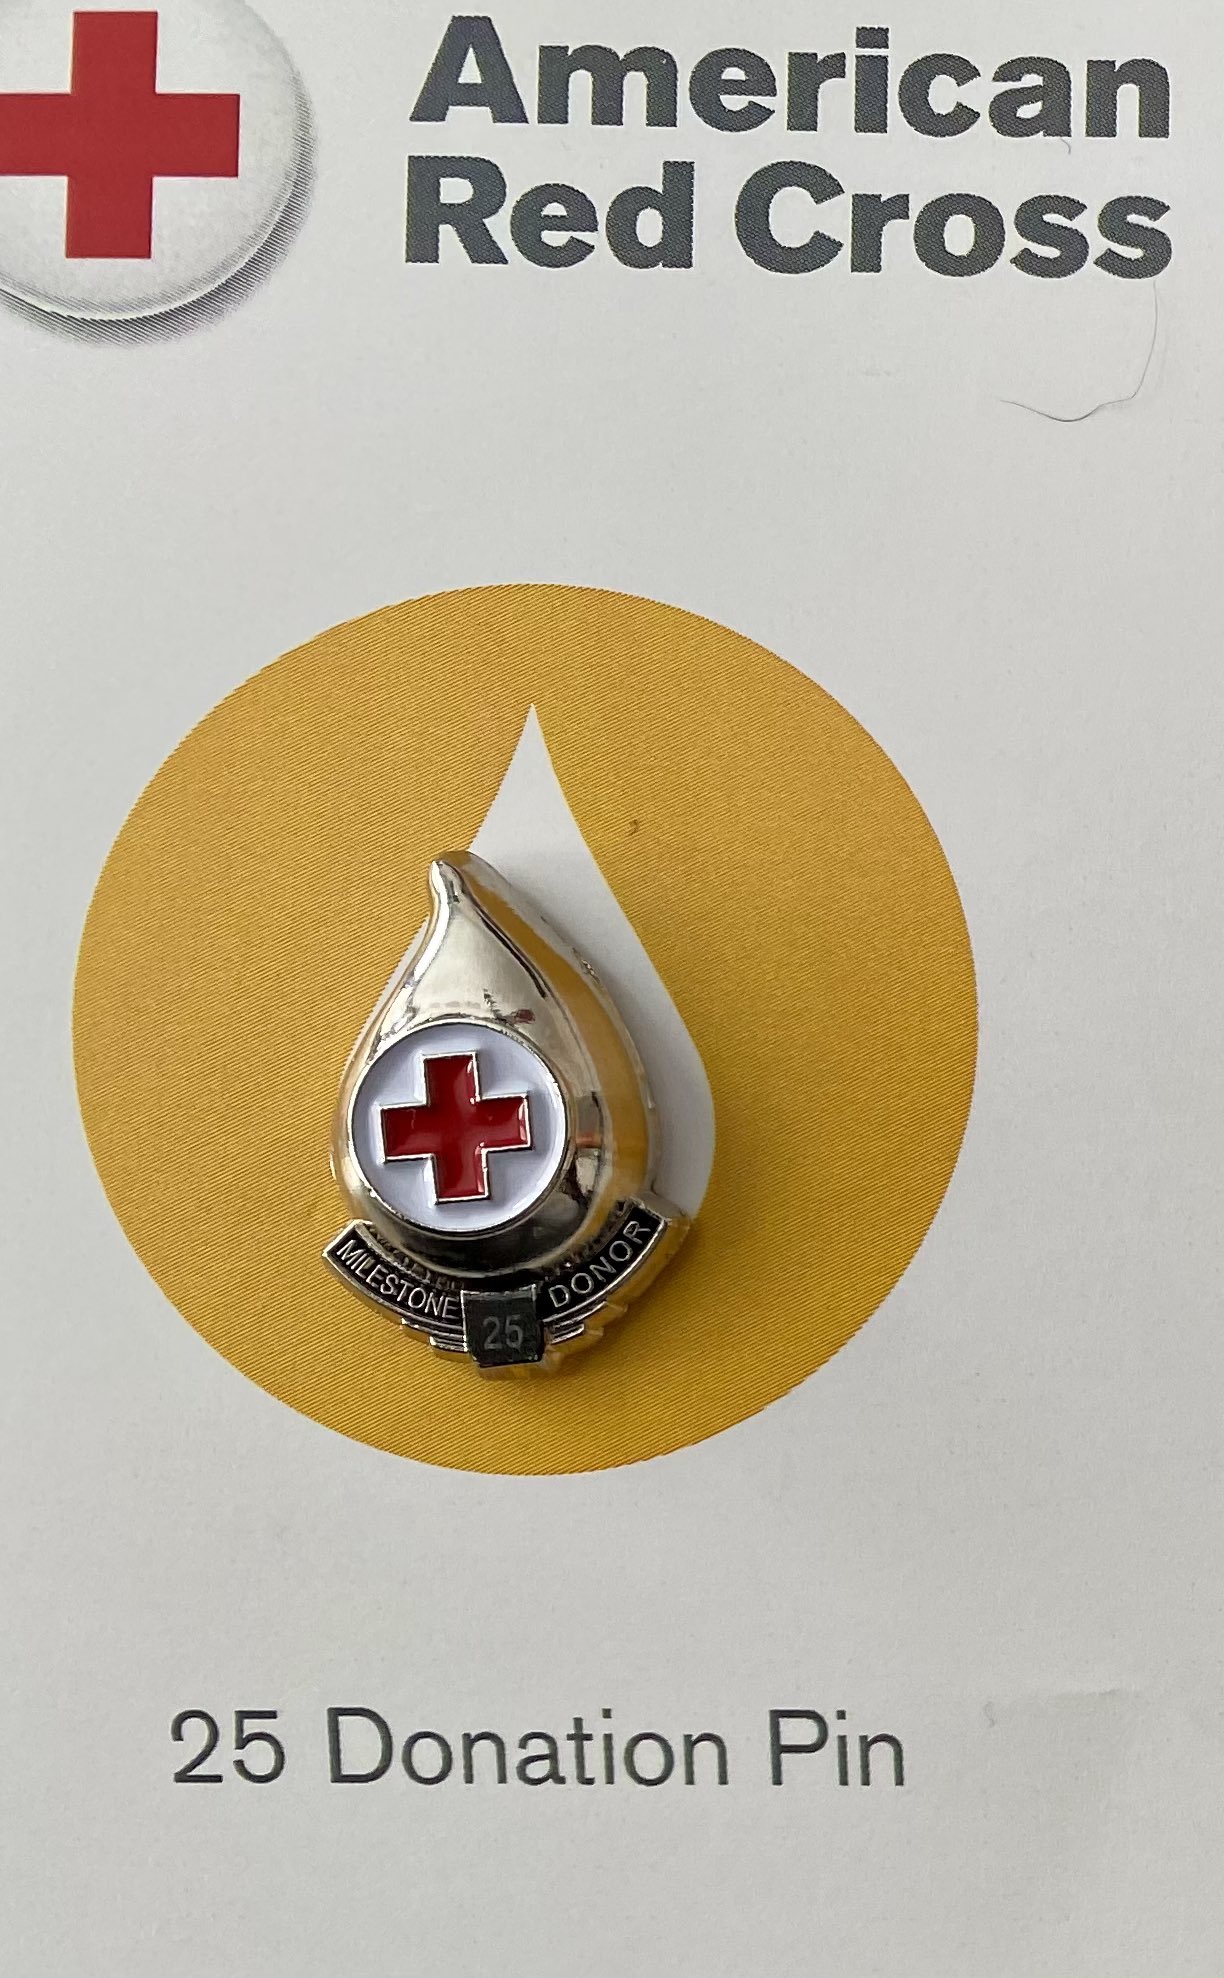 RED CROSS BLOOD DONOR 3 GALLON PIN 